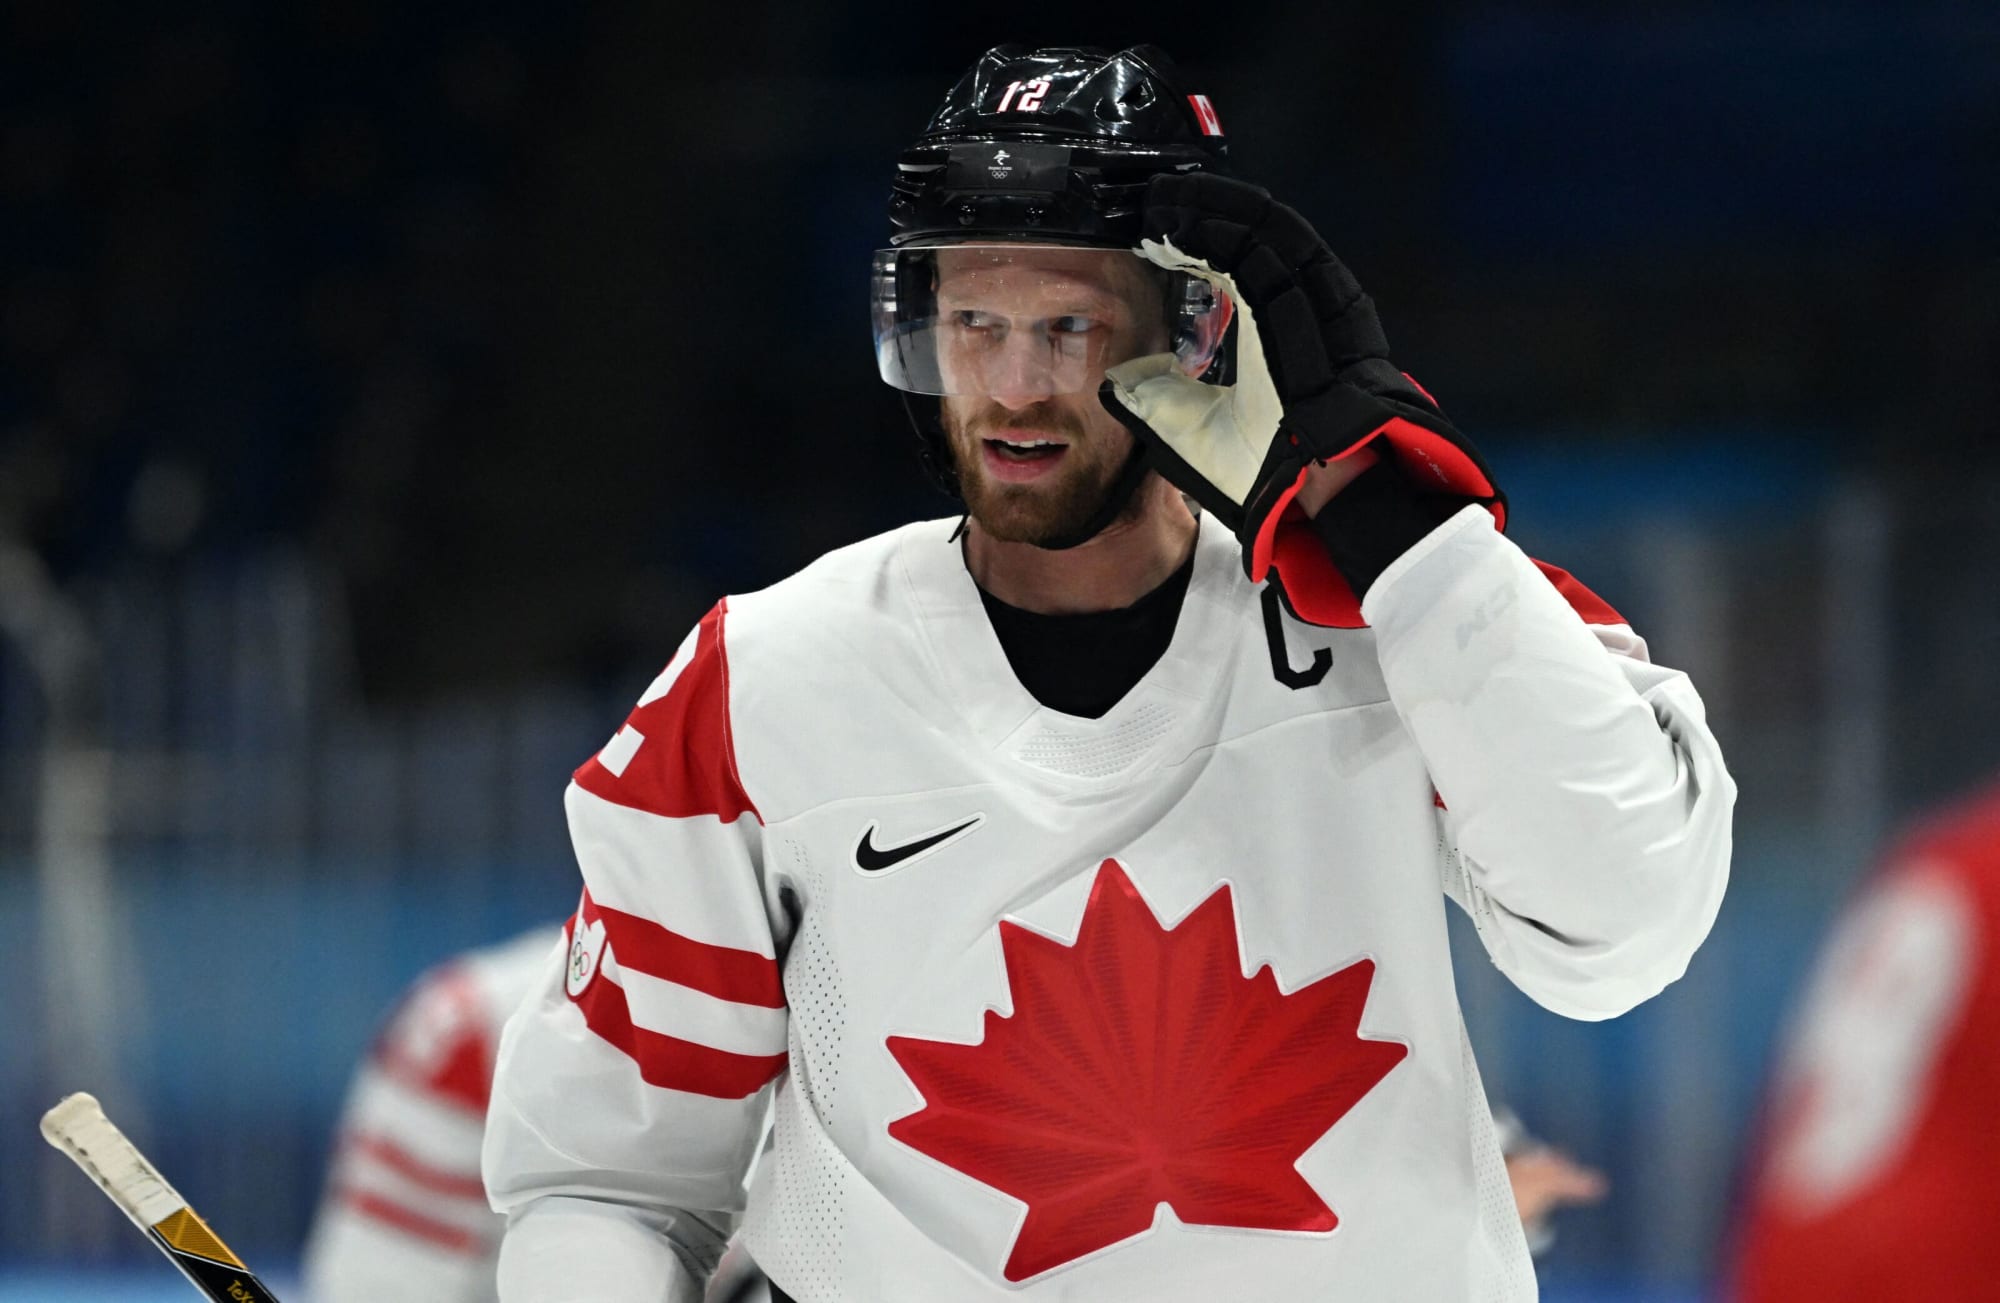 Panthers' Eric, Marc Staal Decline to Wear Pride Jerseys; Cite Religious  Beliefs, News, Scores, Highlights, Stats, and Rumors